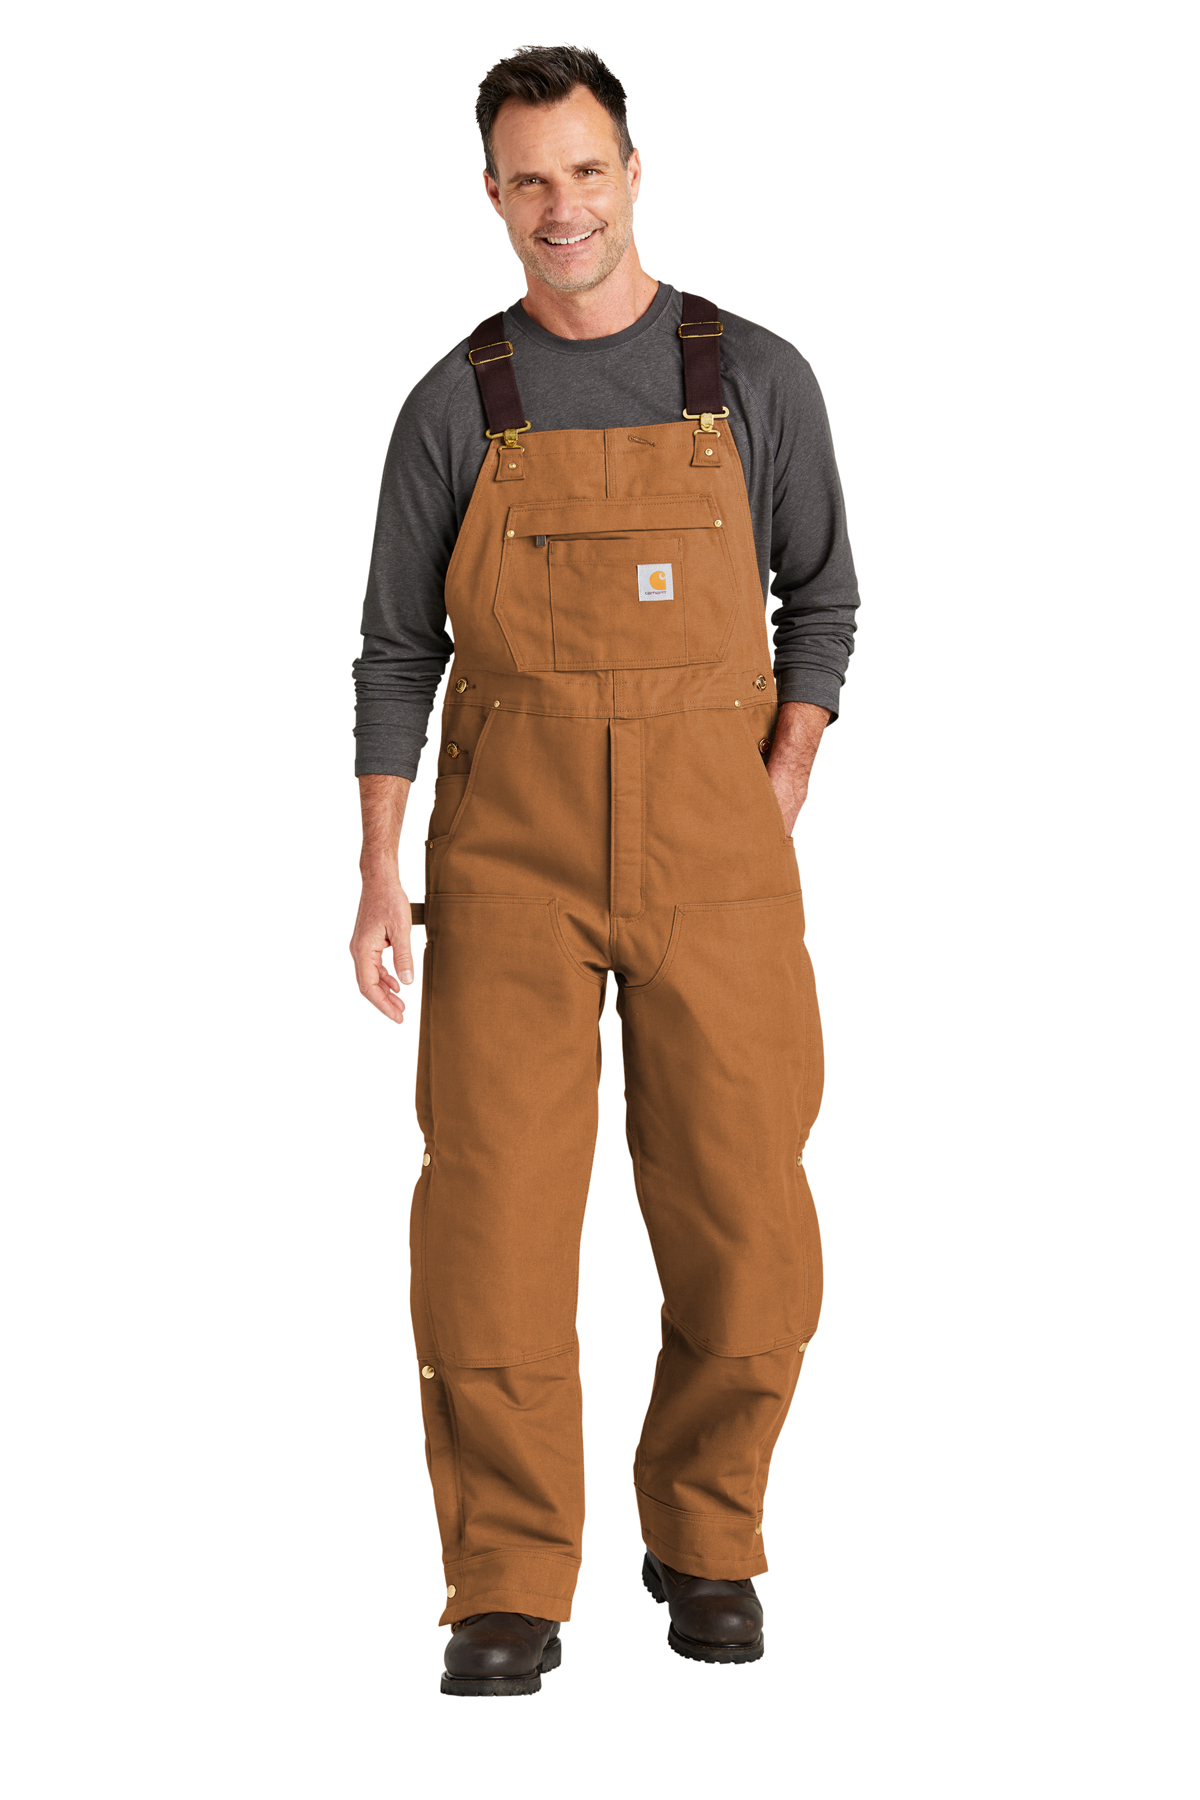 Carhartt Firm Duck Insulated Bib Overalls | Product | Company Casuals